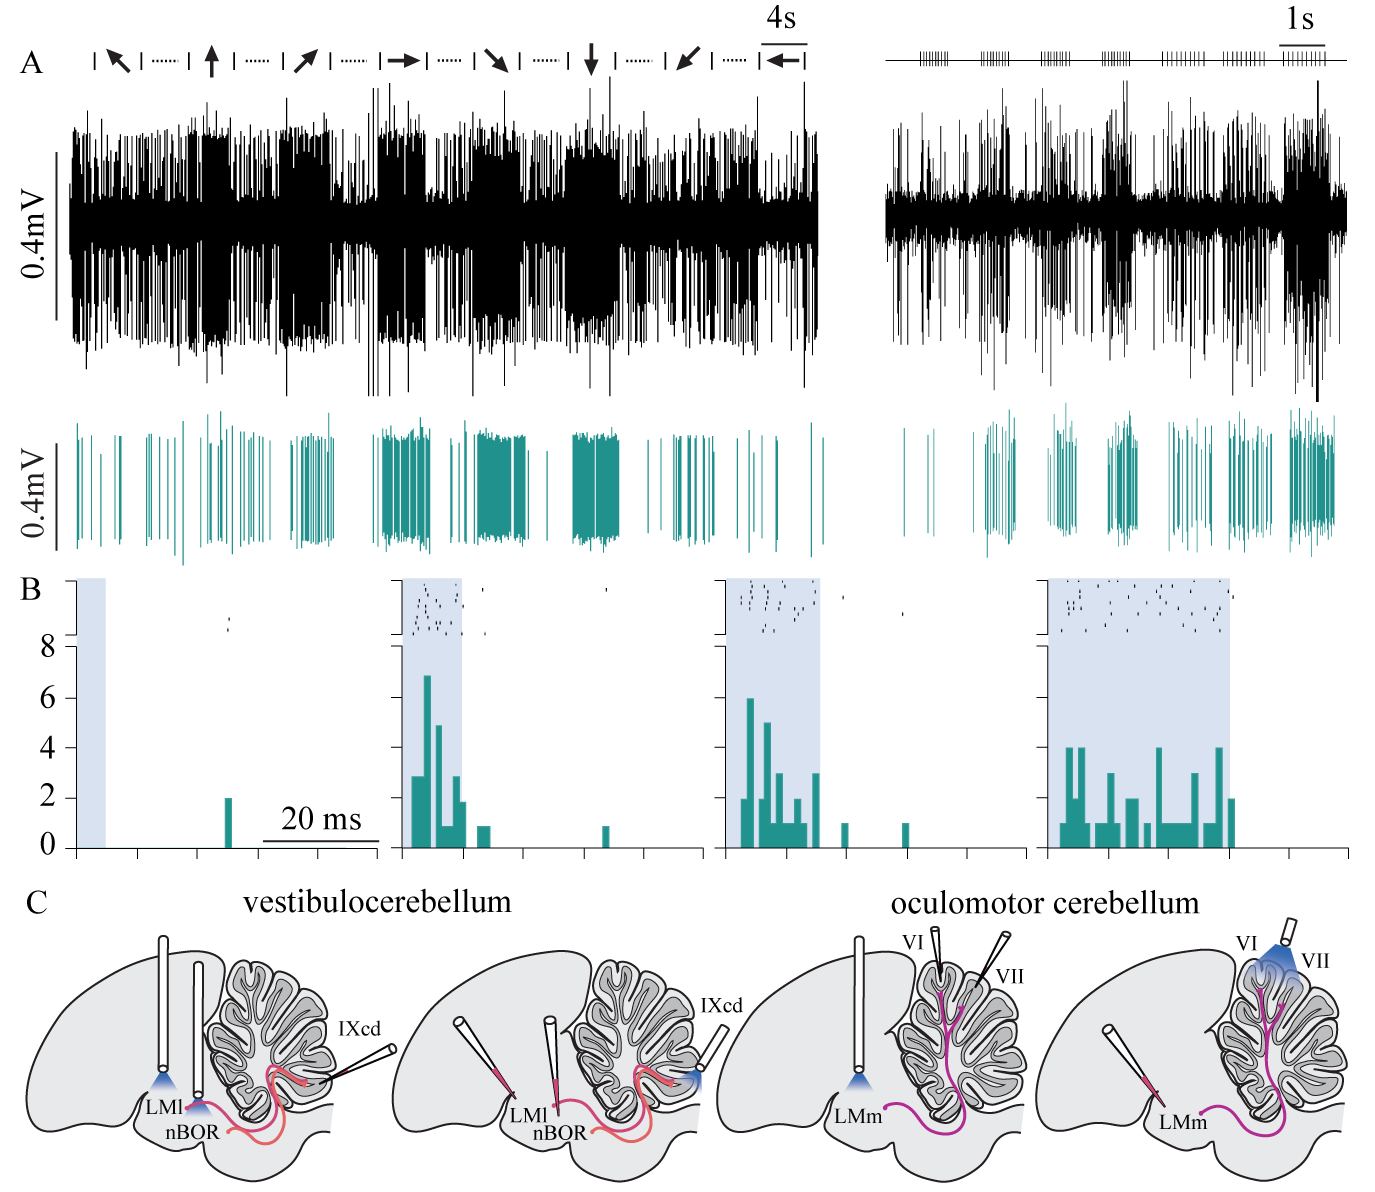 multi-unit recording figure during visual stimulus and laser stimulus of optogenetically manipulated LM neurons in a zebra finch